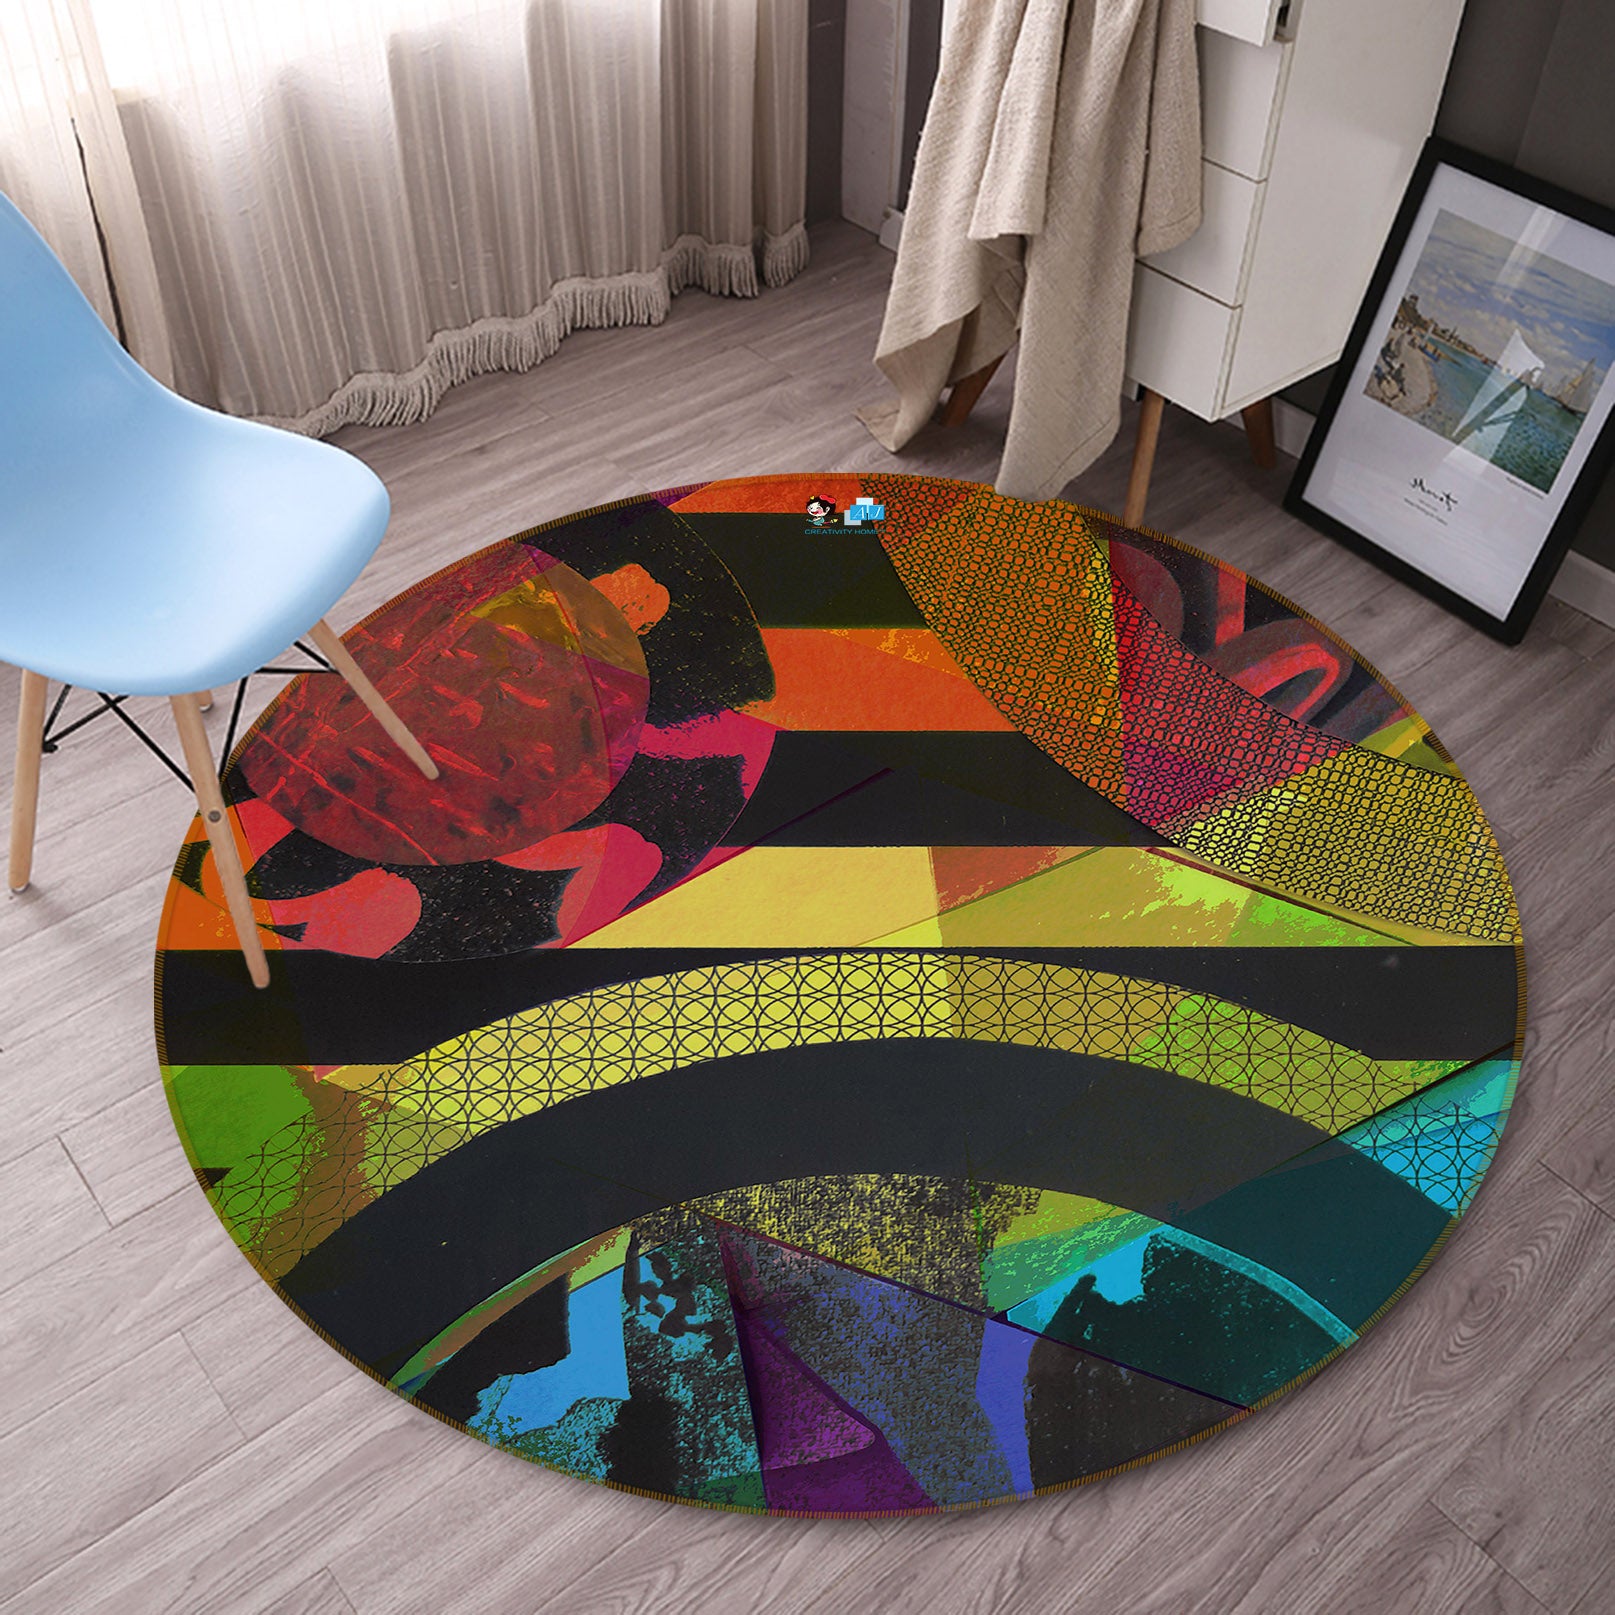 3D Color Pattern 191112 Shandra Smith Rug Round Non Slip Rug Mat